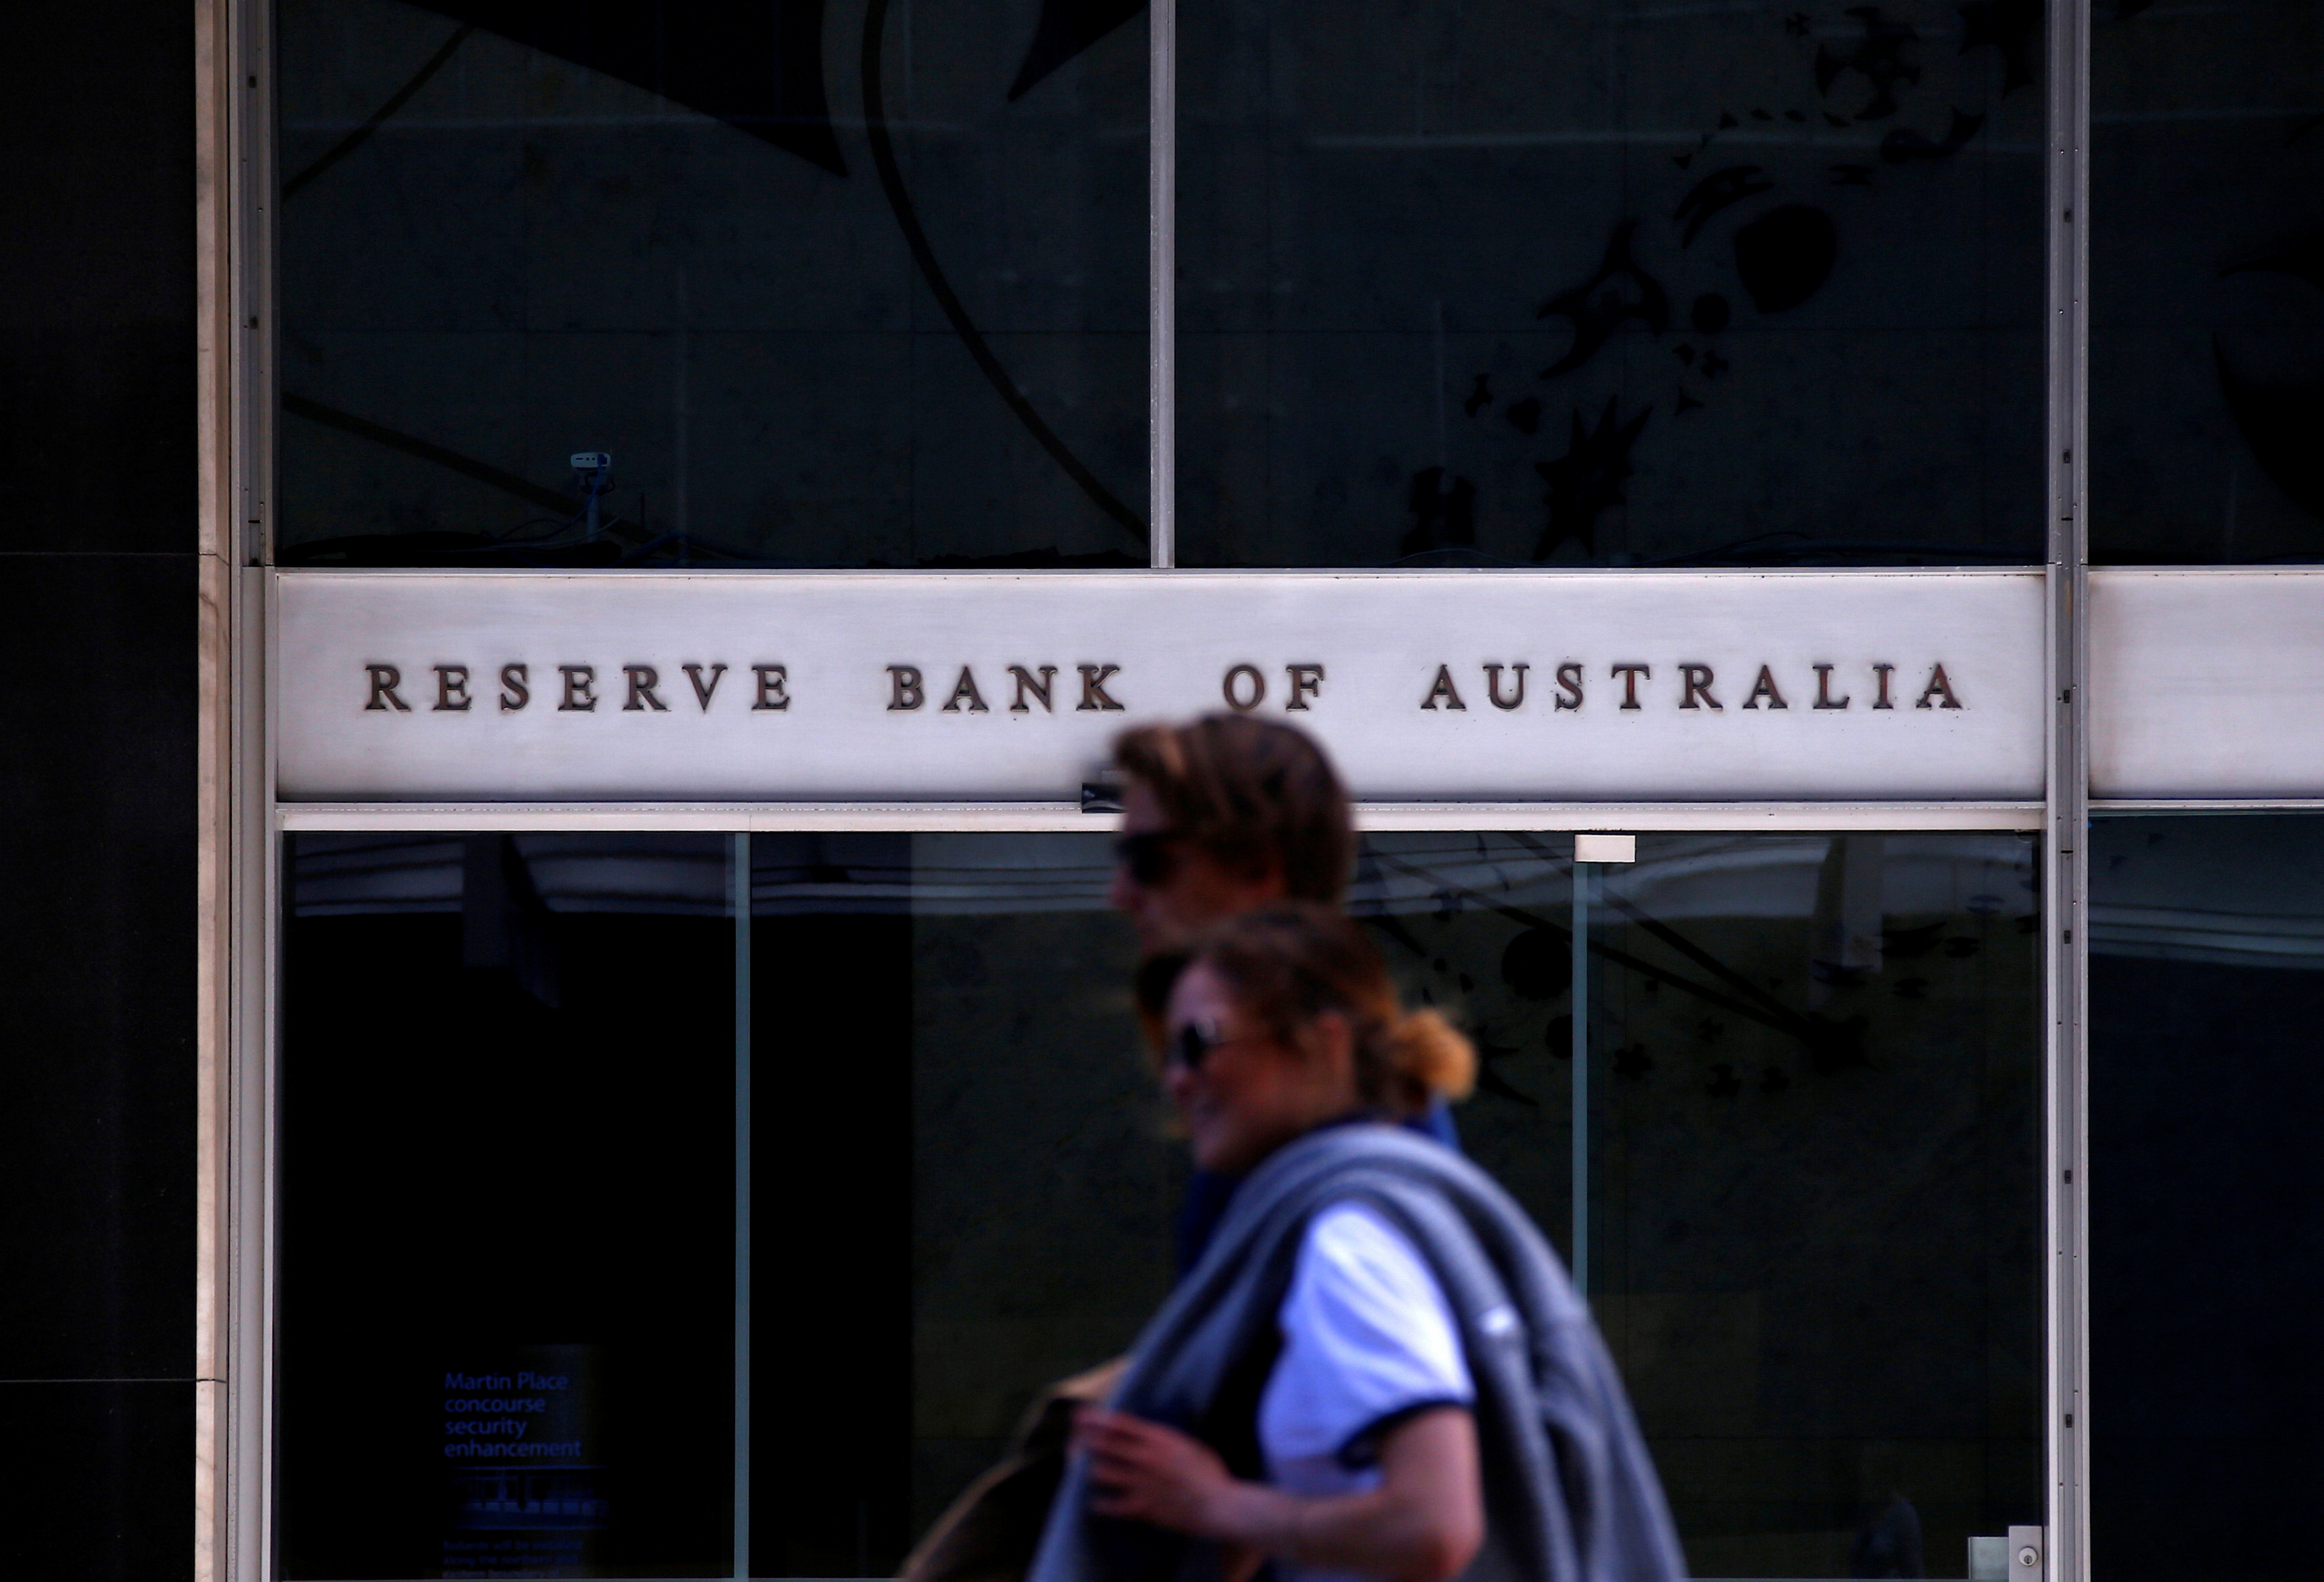 Pedestrians walk past the main entrance to the Reserve Bank of Australia building in central Sydney, Australia